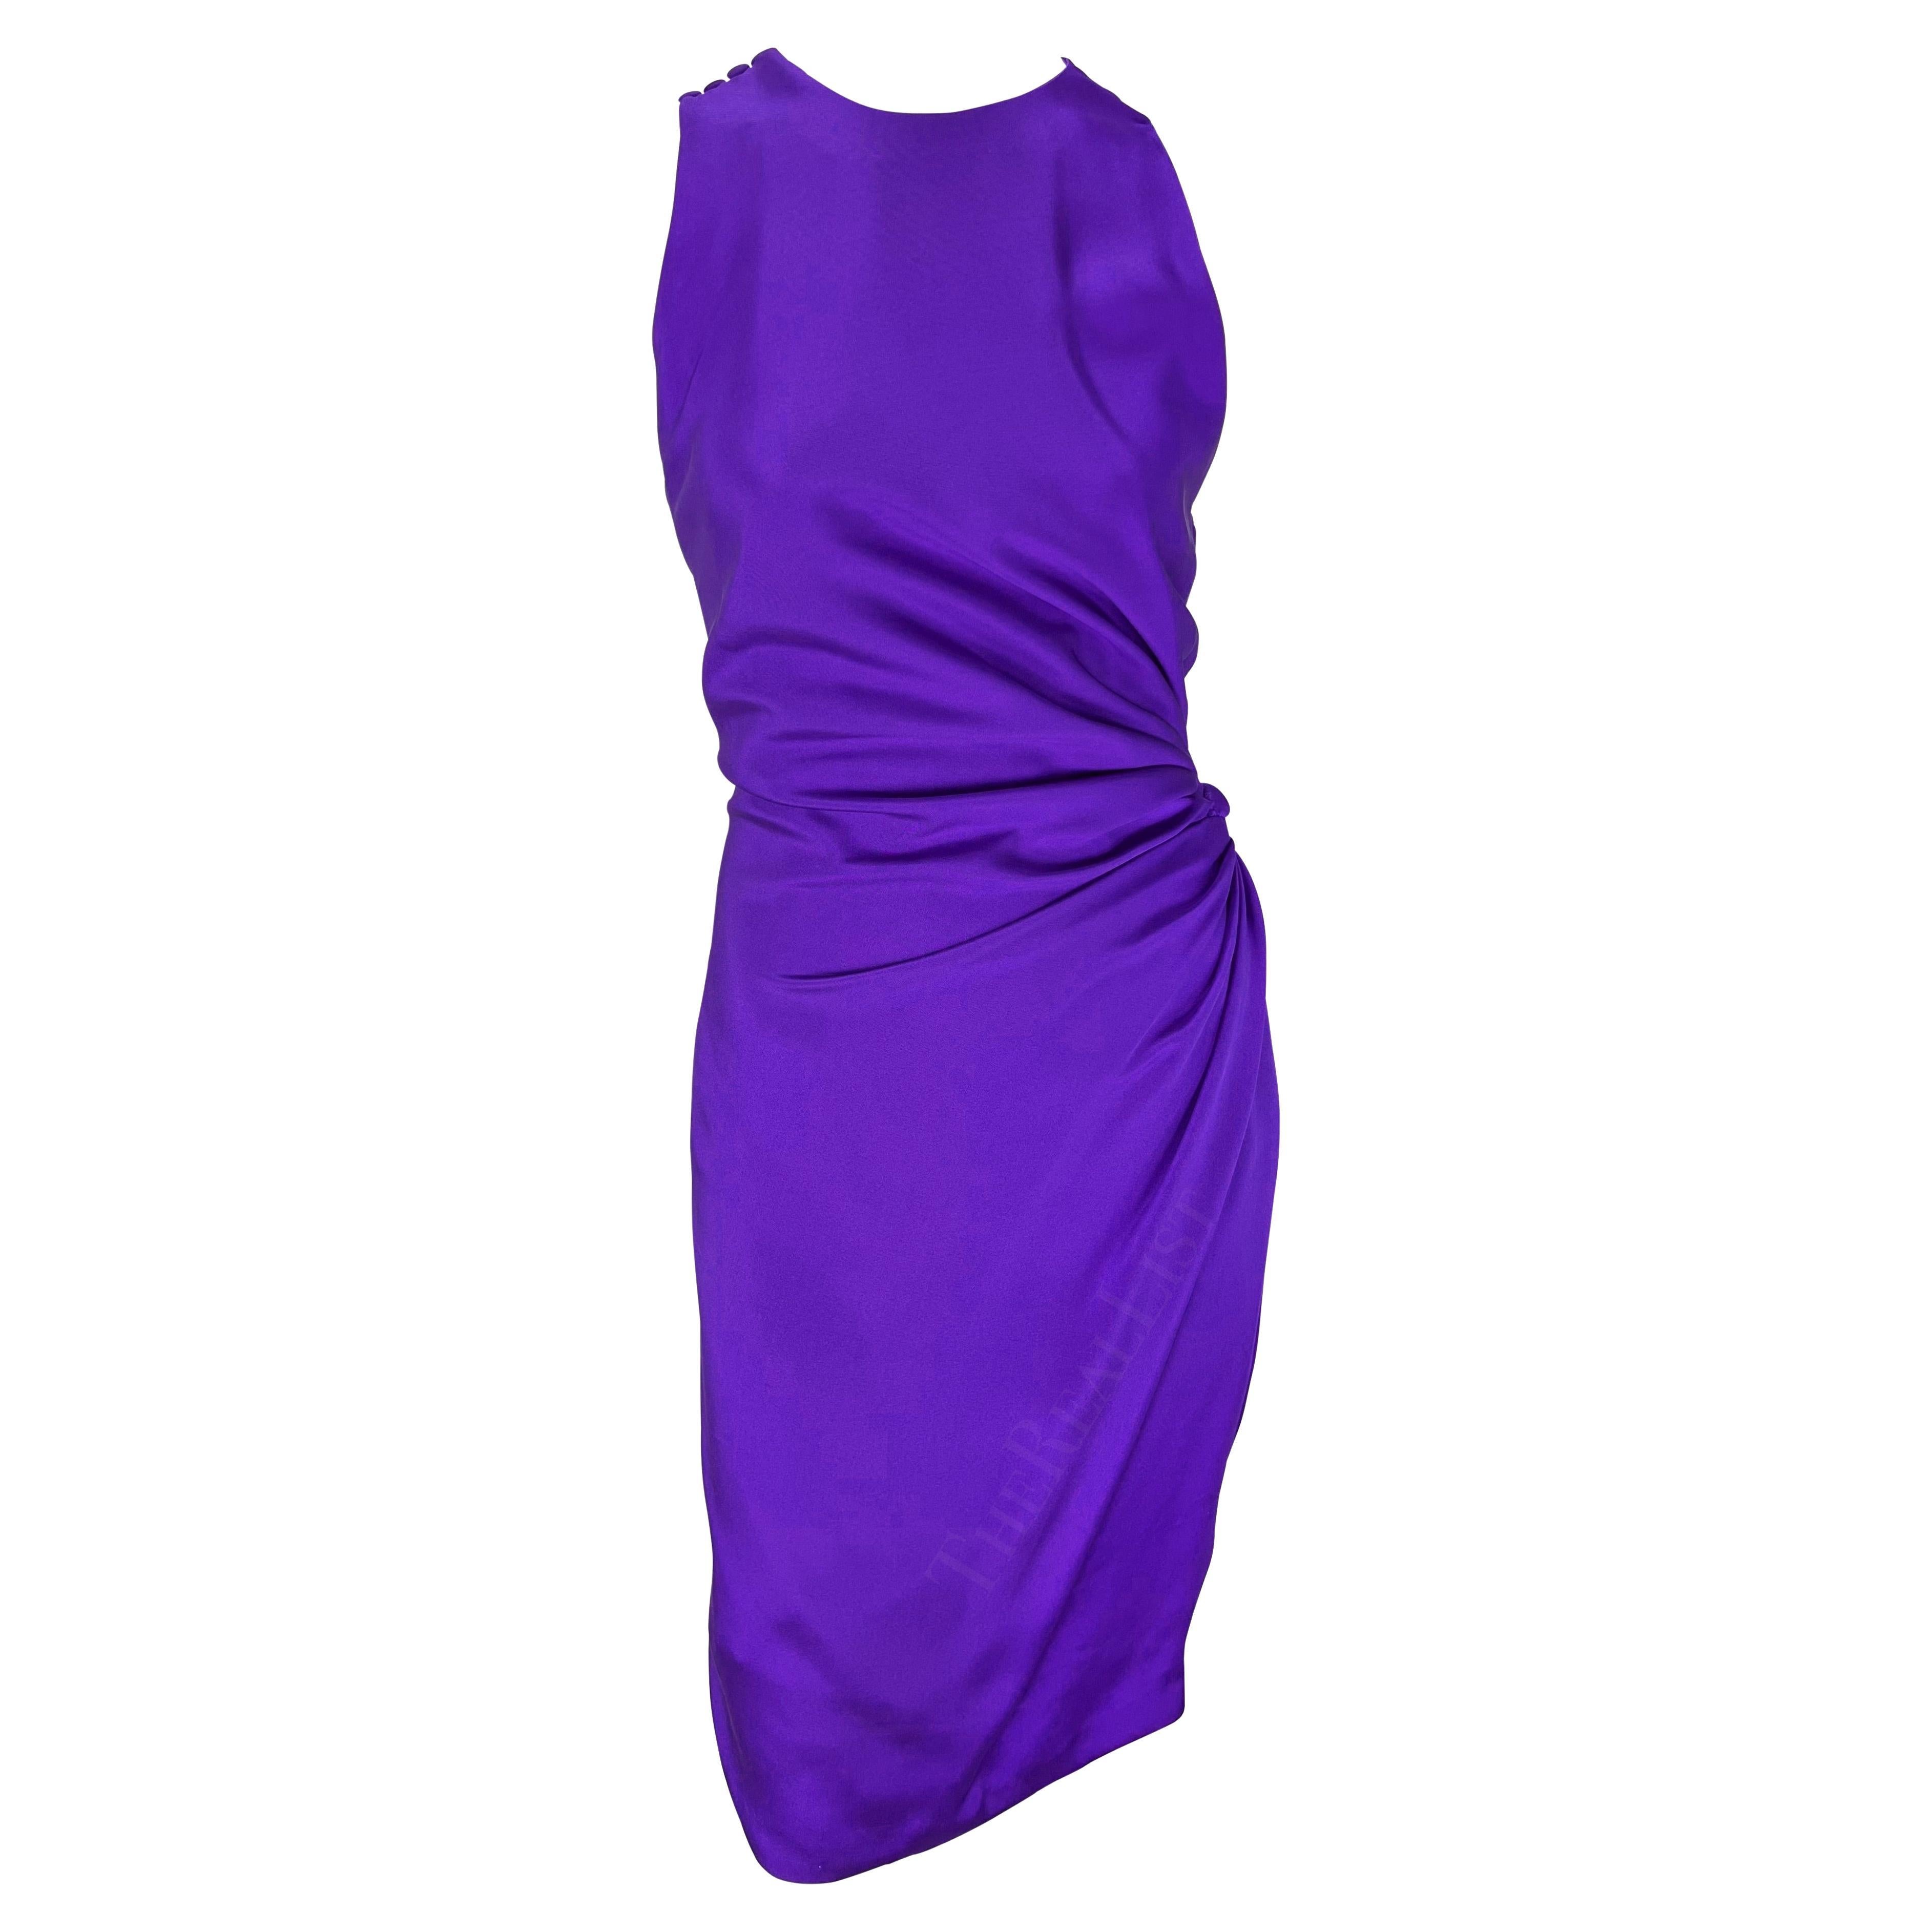 S/S 1991 Gianni Versace Purple Gathered Ruched Sleeveless Cocktail Dress en vente